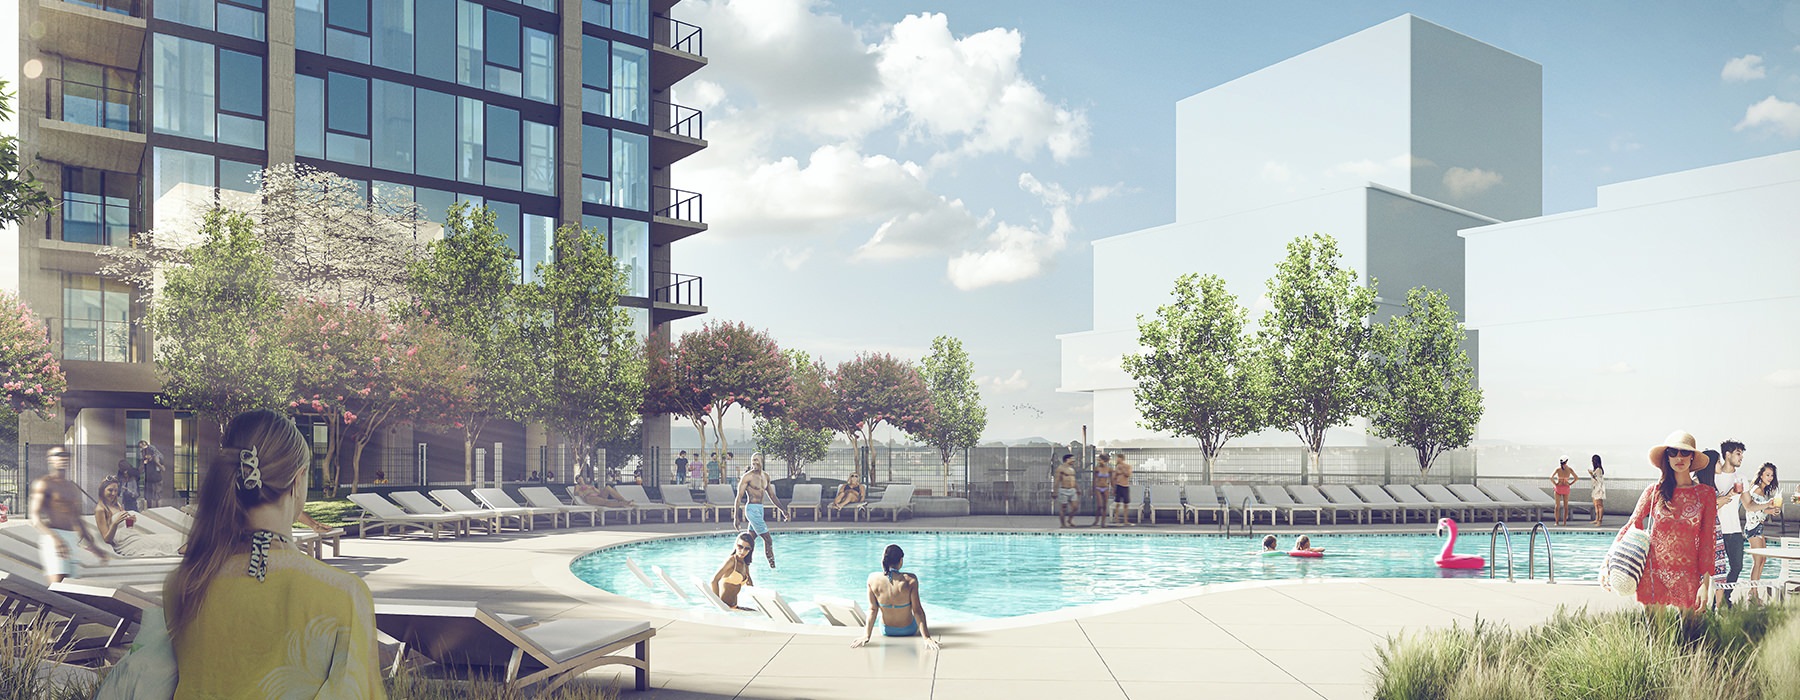 rendering of pool with view of skyline with buildings